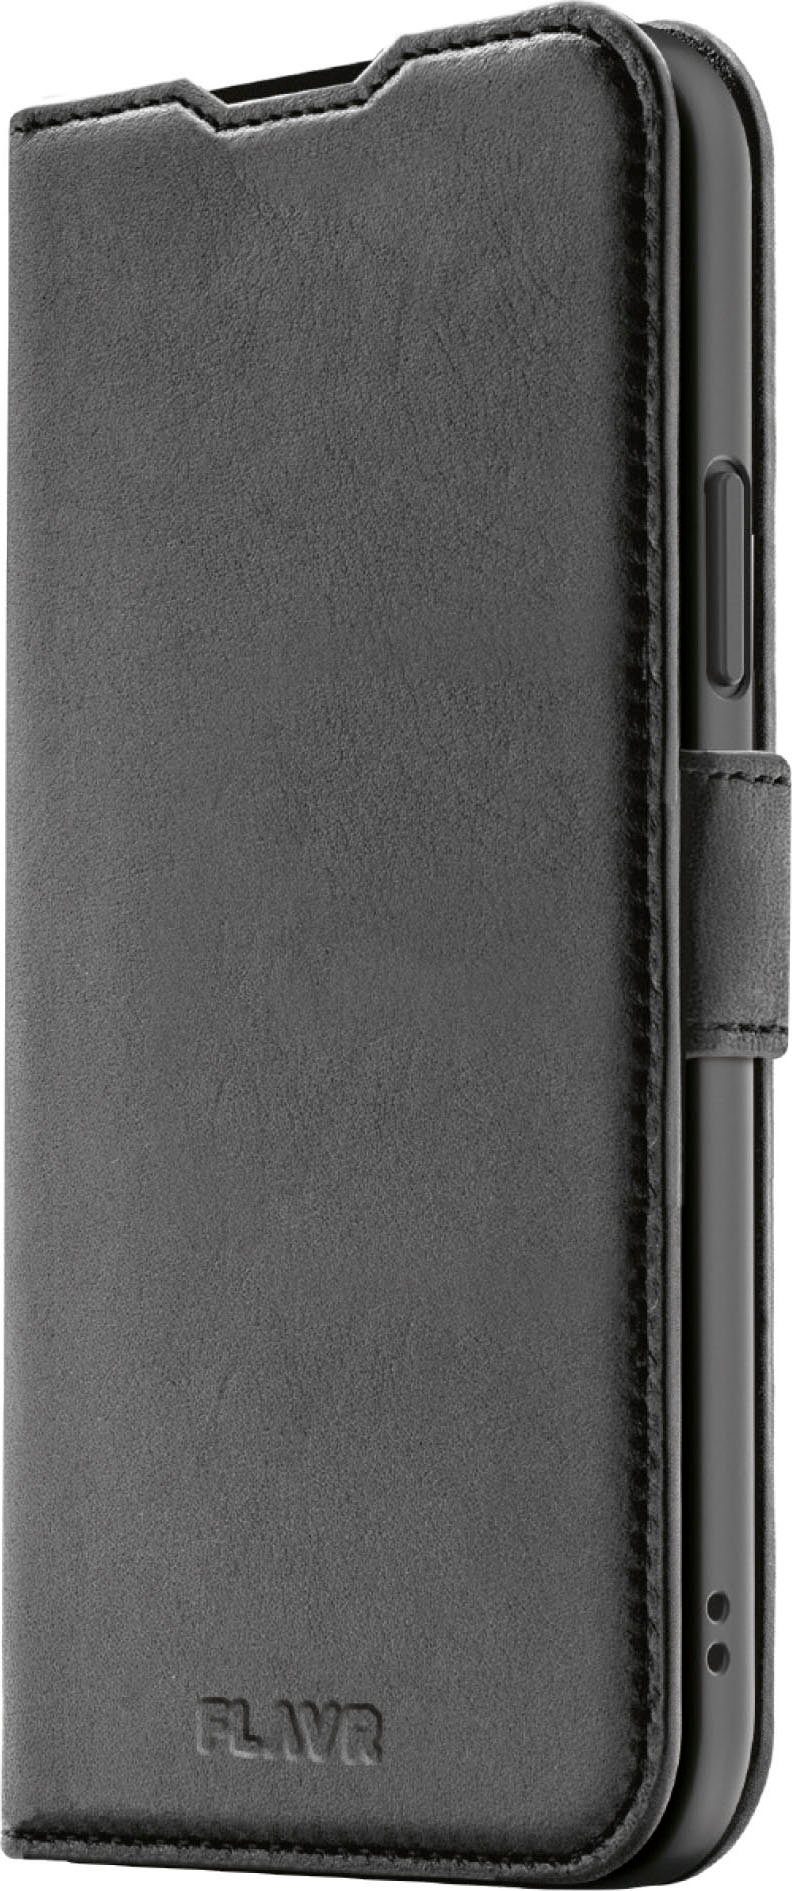 adidas Originals Backcover Wallet Case Leather FLAVR Recycled